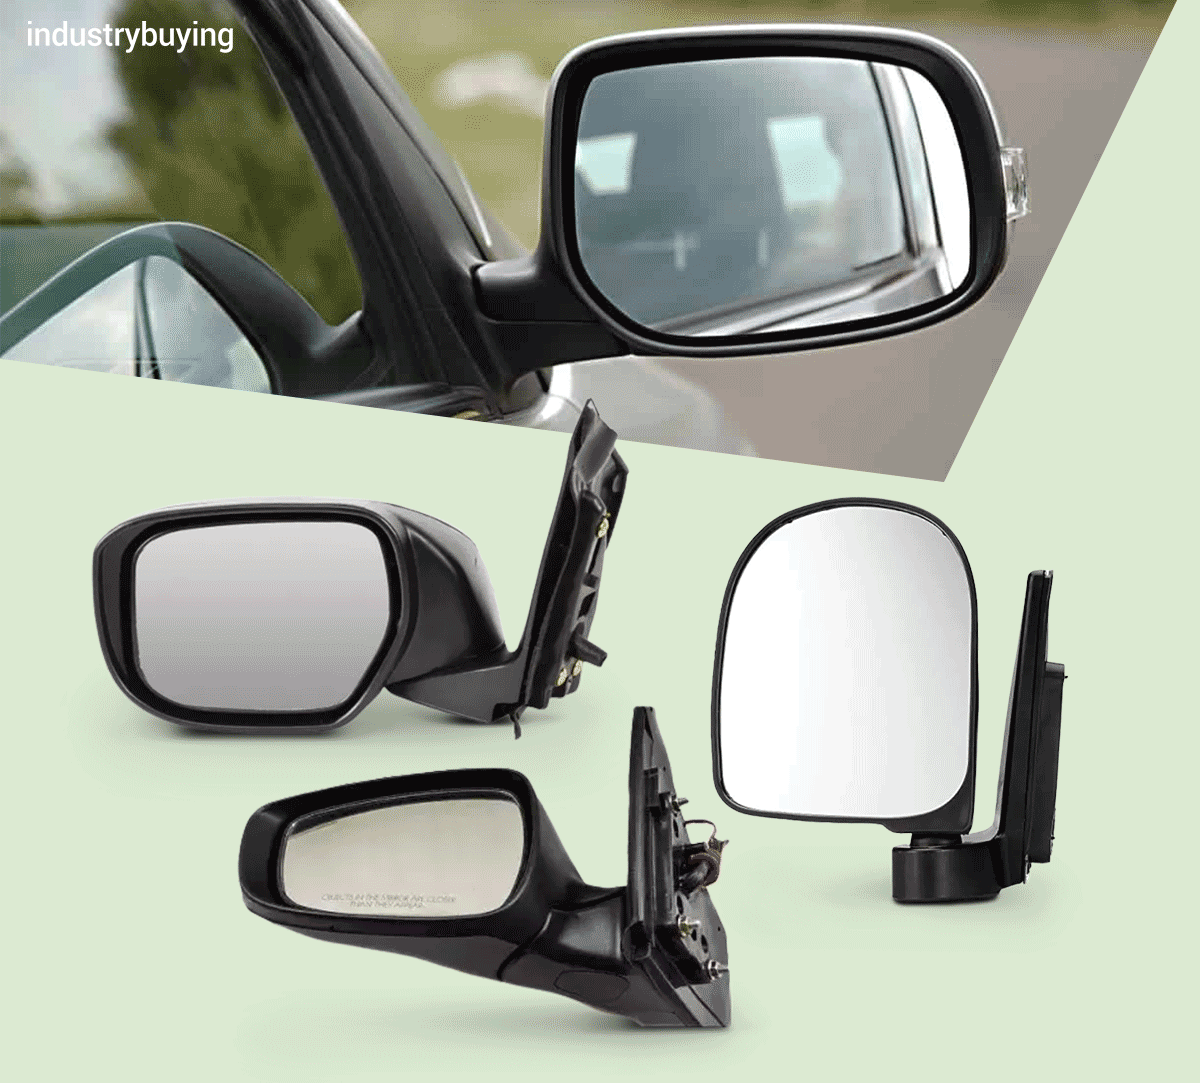 Ensure Maximum Safety With Vehicle Mirrors- Vital Tool For Your Car